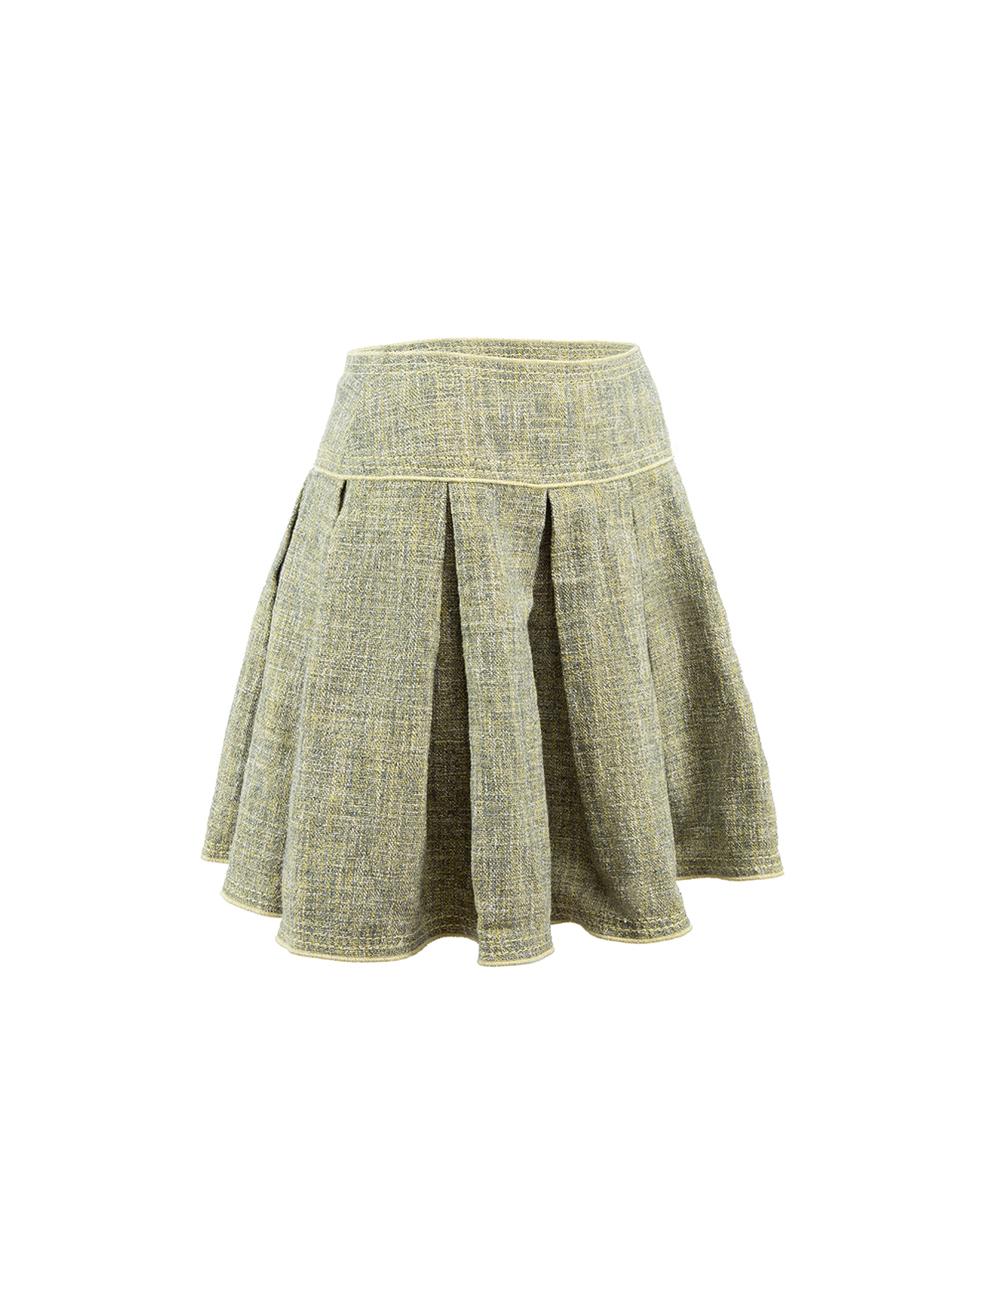 CONDITION is Very good. Hardly any visible wear to skirt is evident on this used Moschino designer resale item.



Details


Green

Tweed

Pleated skirt

Mini length

Side zip closure with hook and eye





Made in Italy



Composition

90% Cotton